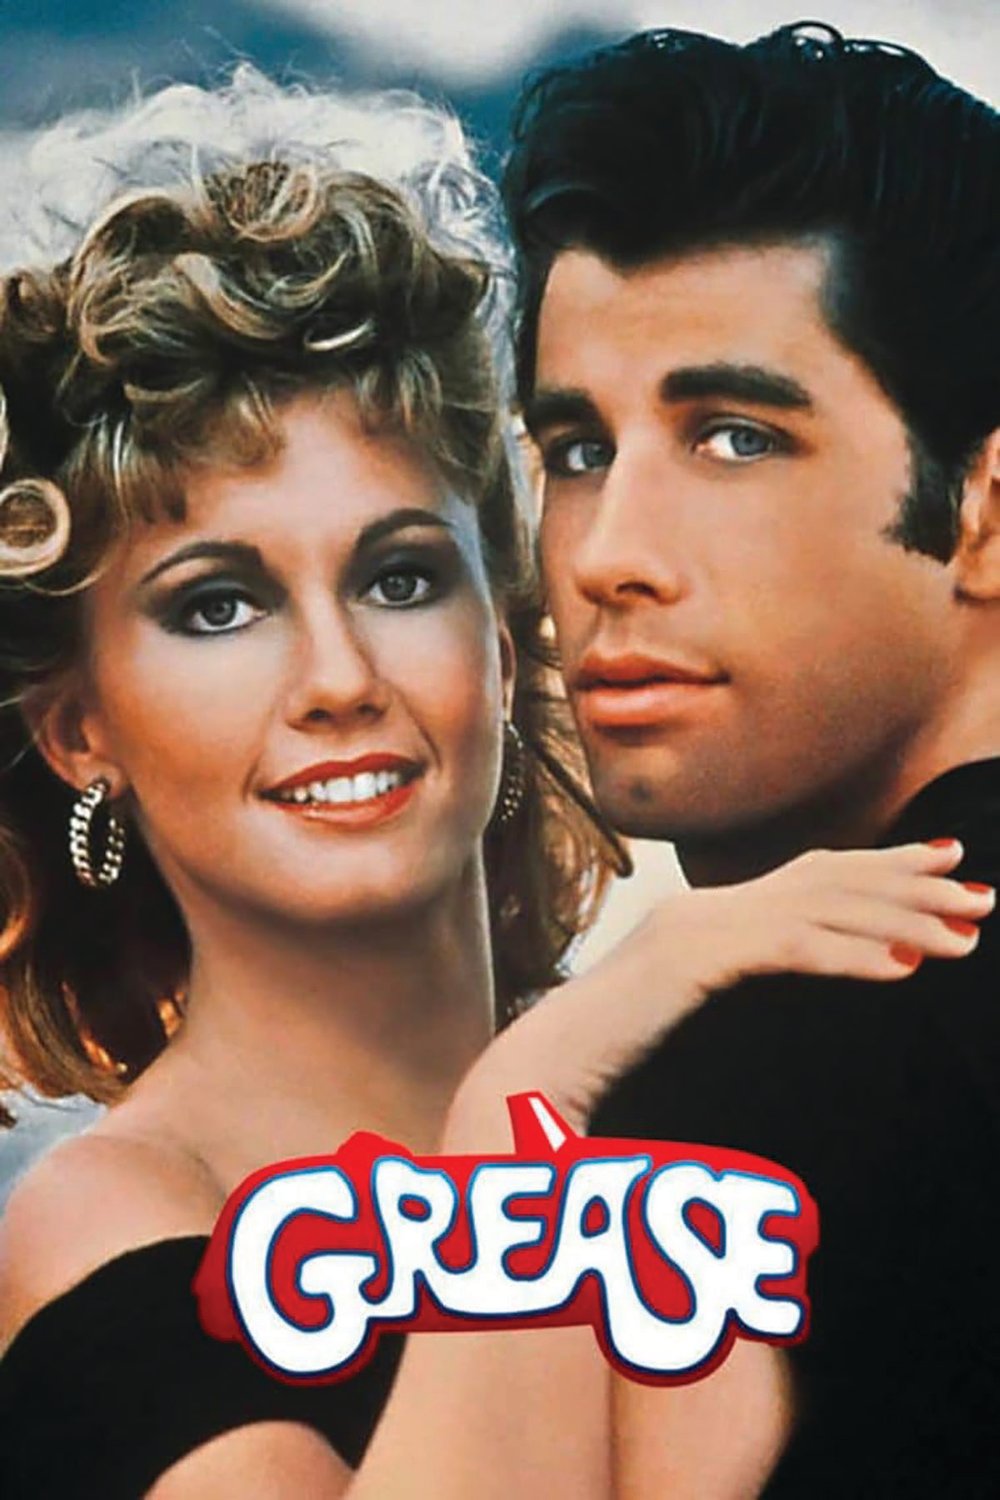 BELLE GLADE — Grease is a 1978 American musical romantic comedy film staring Jon Travolta and Olyvia Newton-John.